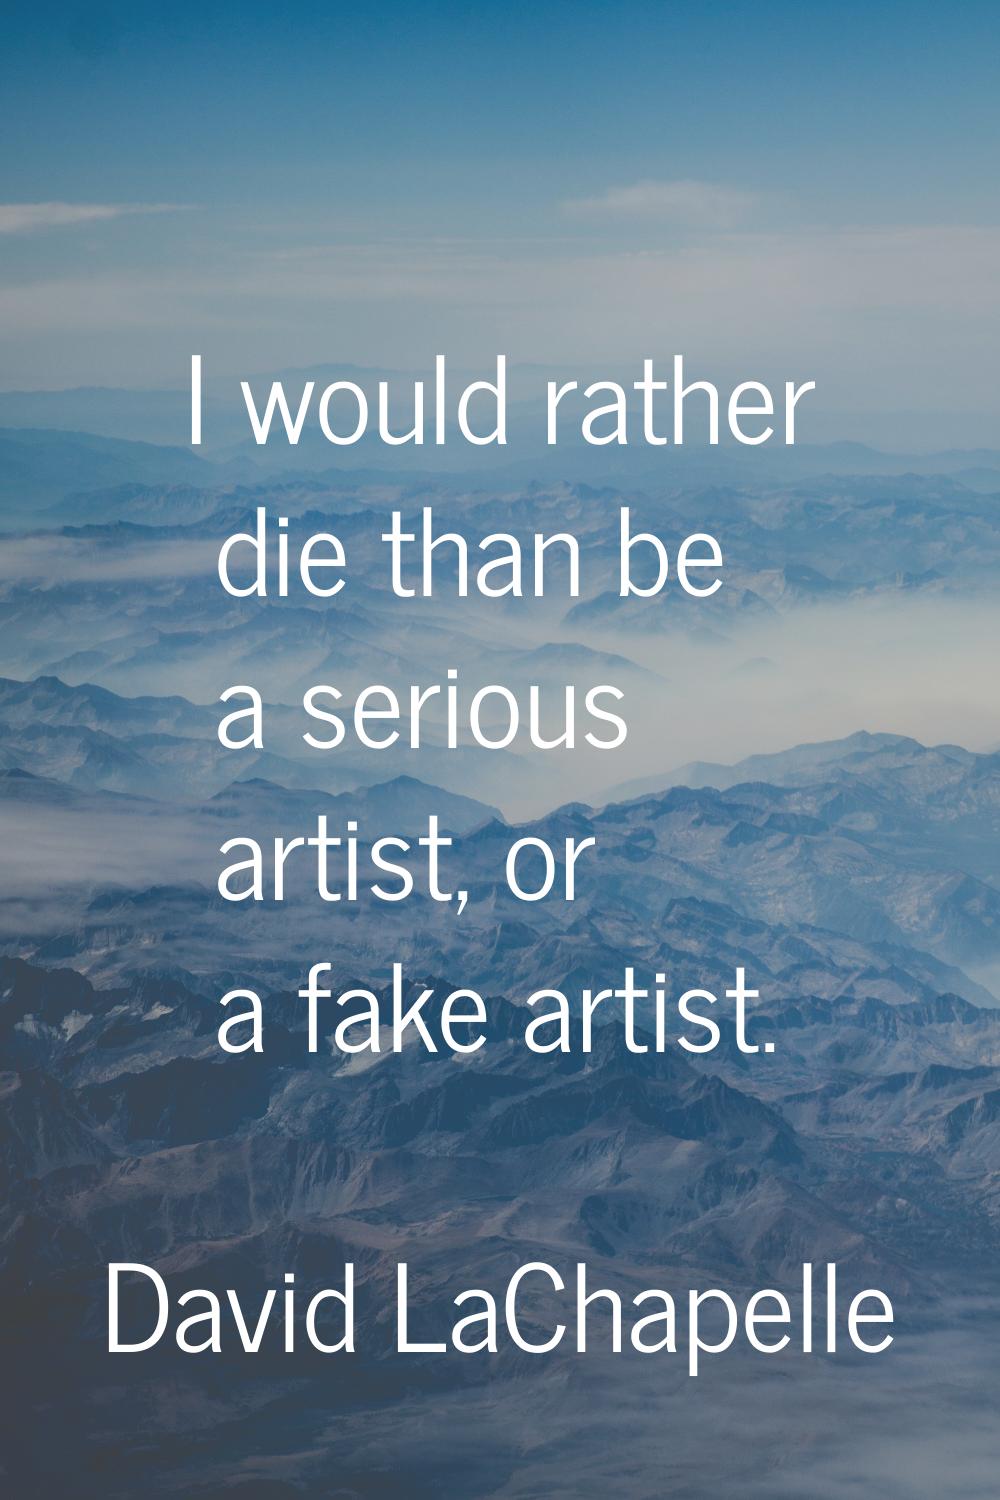 I would rather die than be a serious artist, or a fake artist.